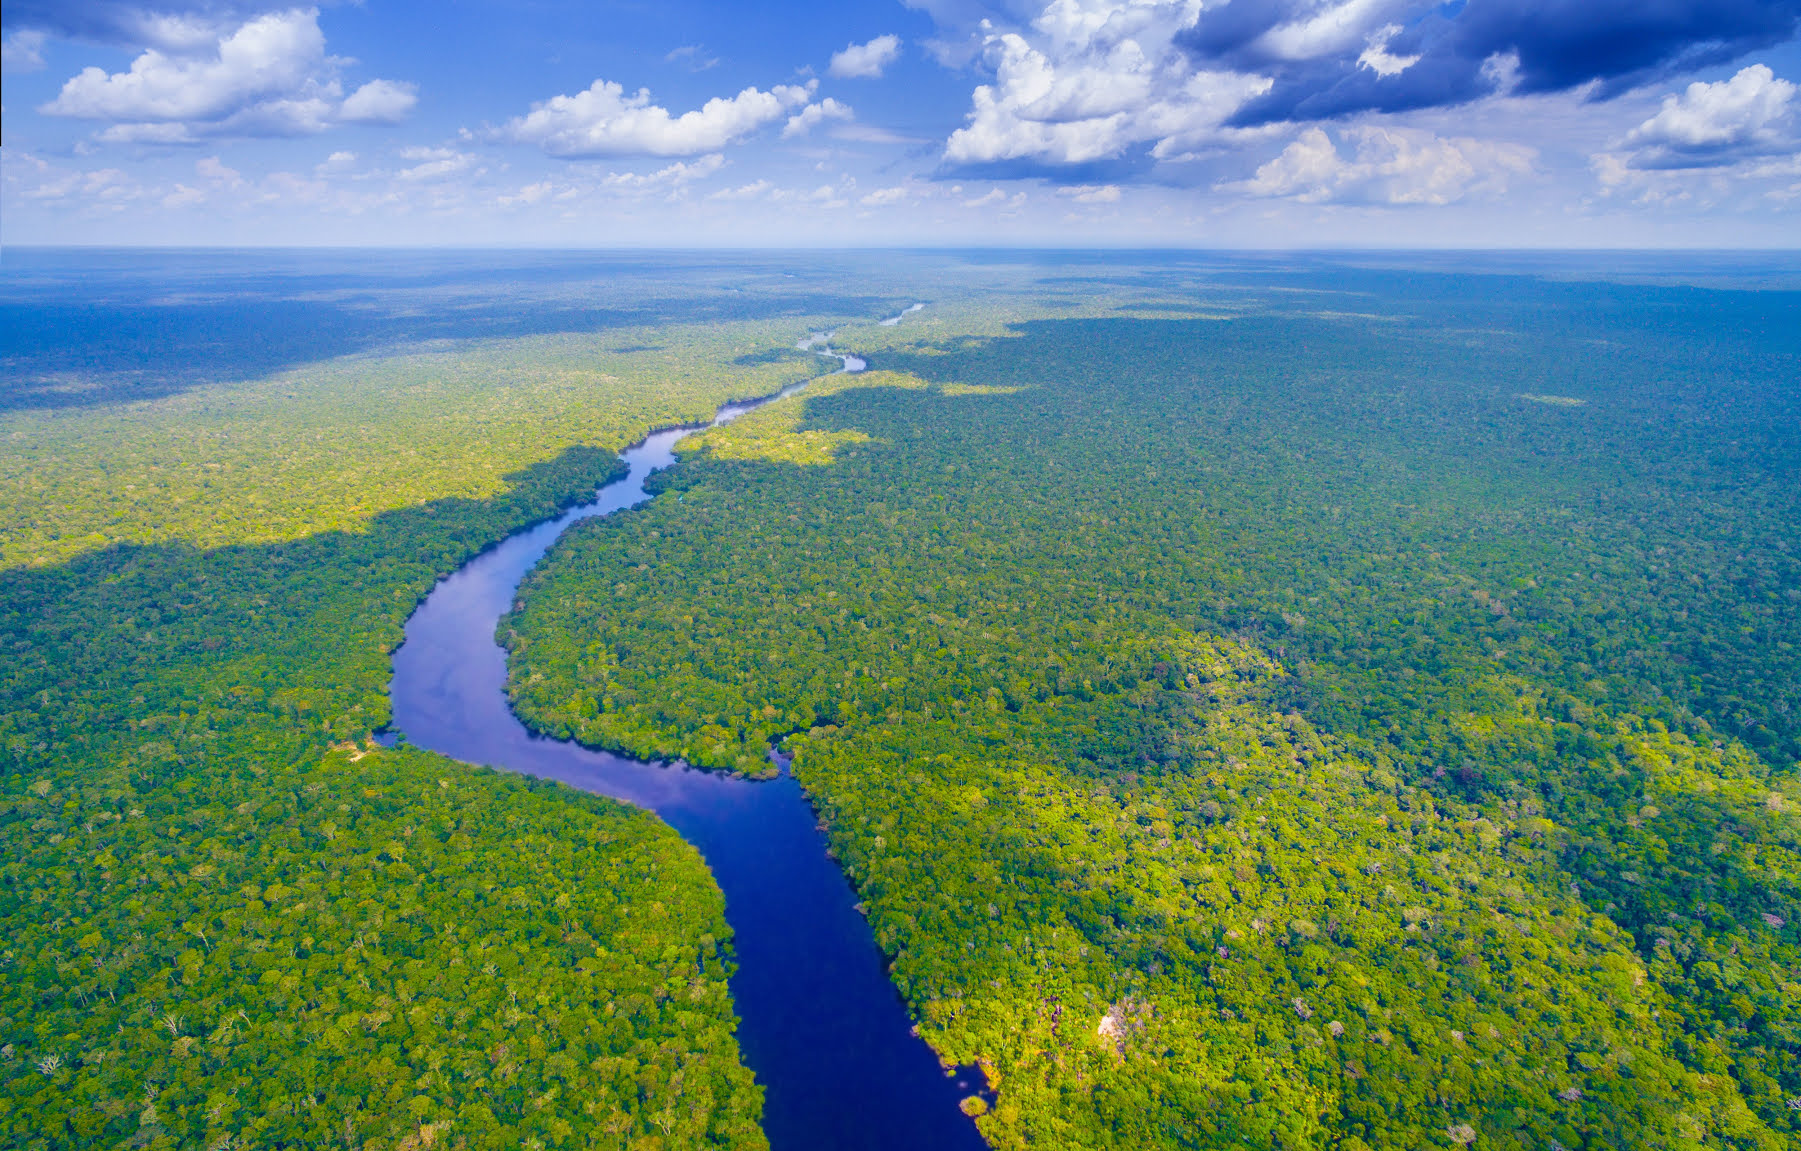 The Amazon rainforest is facing devastation – here's how travelers can help 